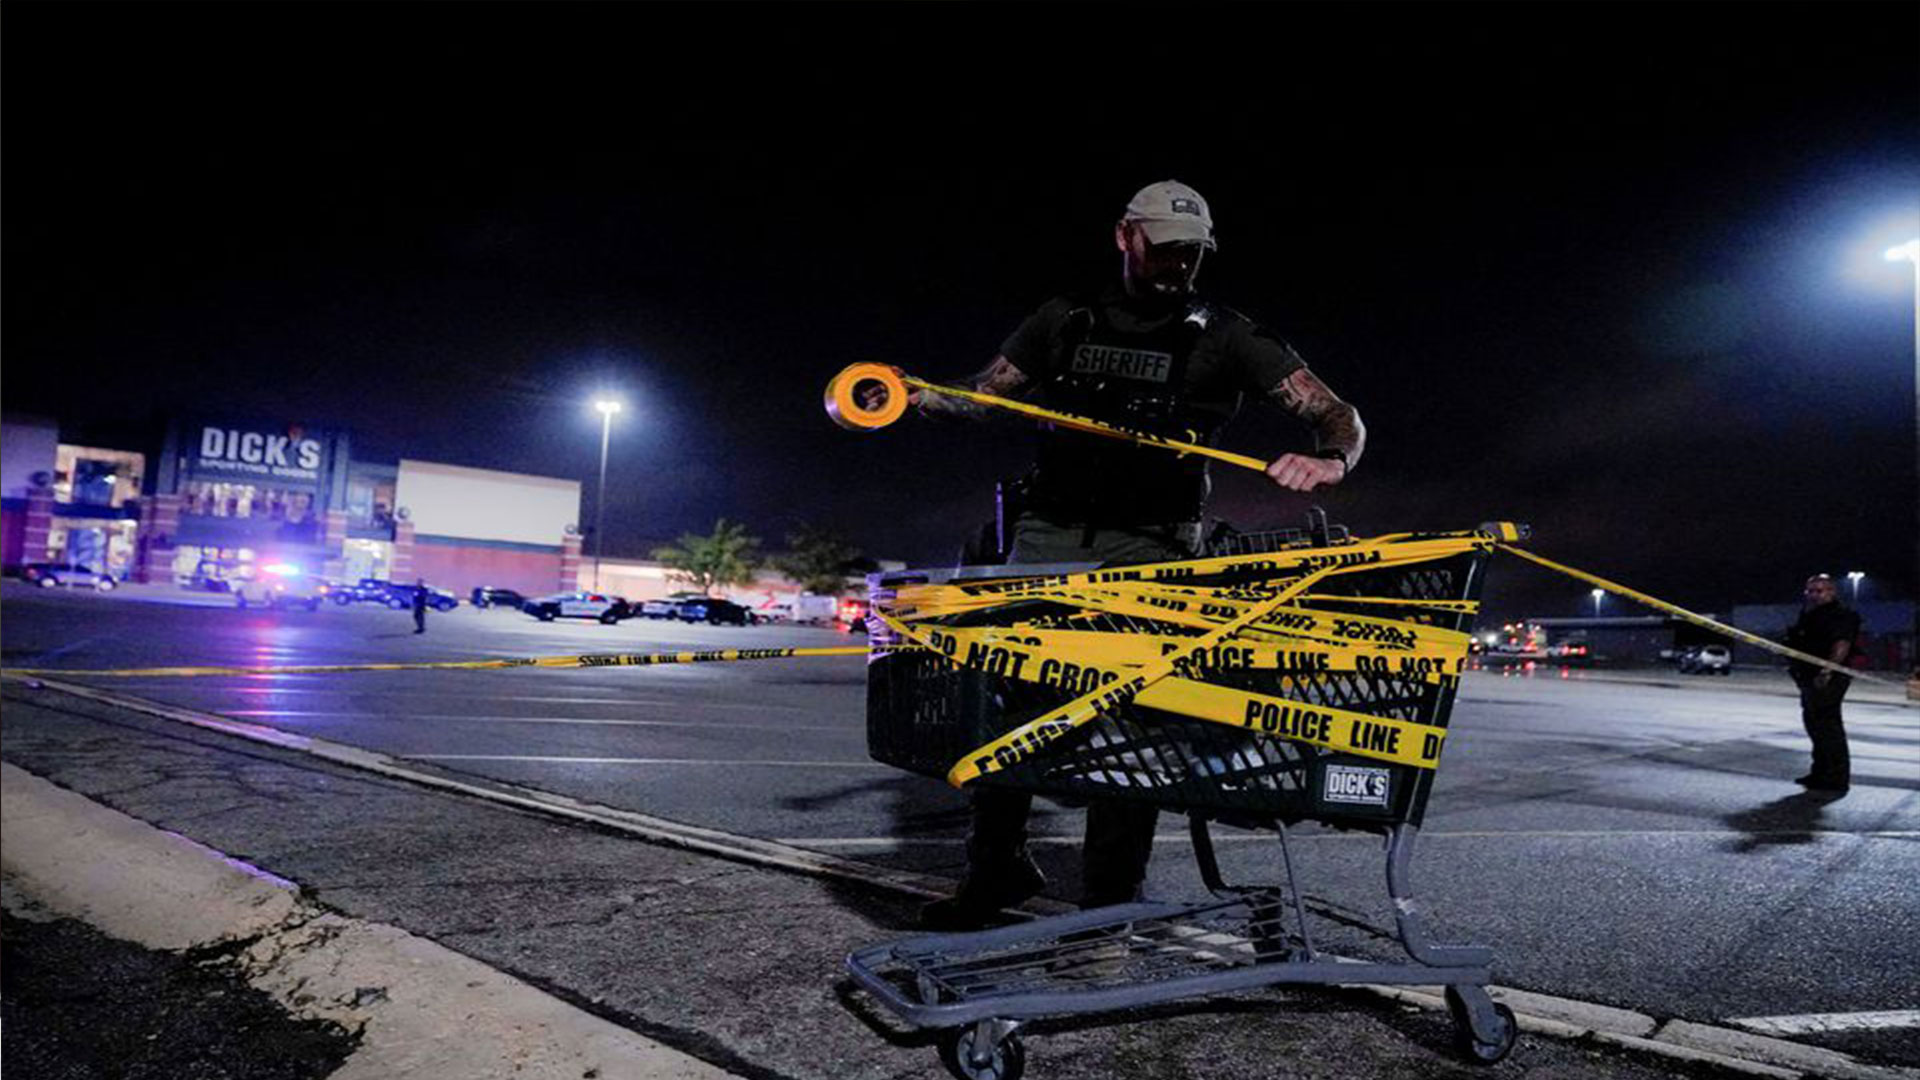  A law enforcement officer attaches a crime scene tape to a shopping cart after a shooting at a mall in the Indianapolis suburb of Greenwood, Indiana, U.S. July 17, 2022. REUTERS/Cheney Orr